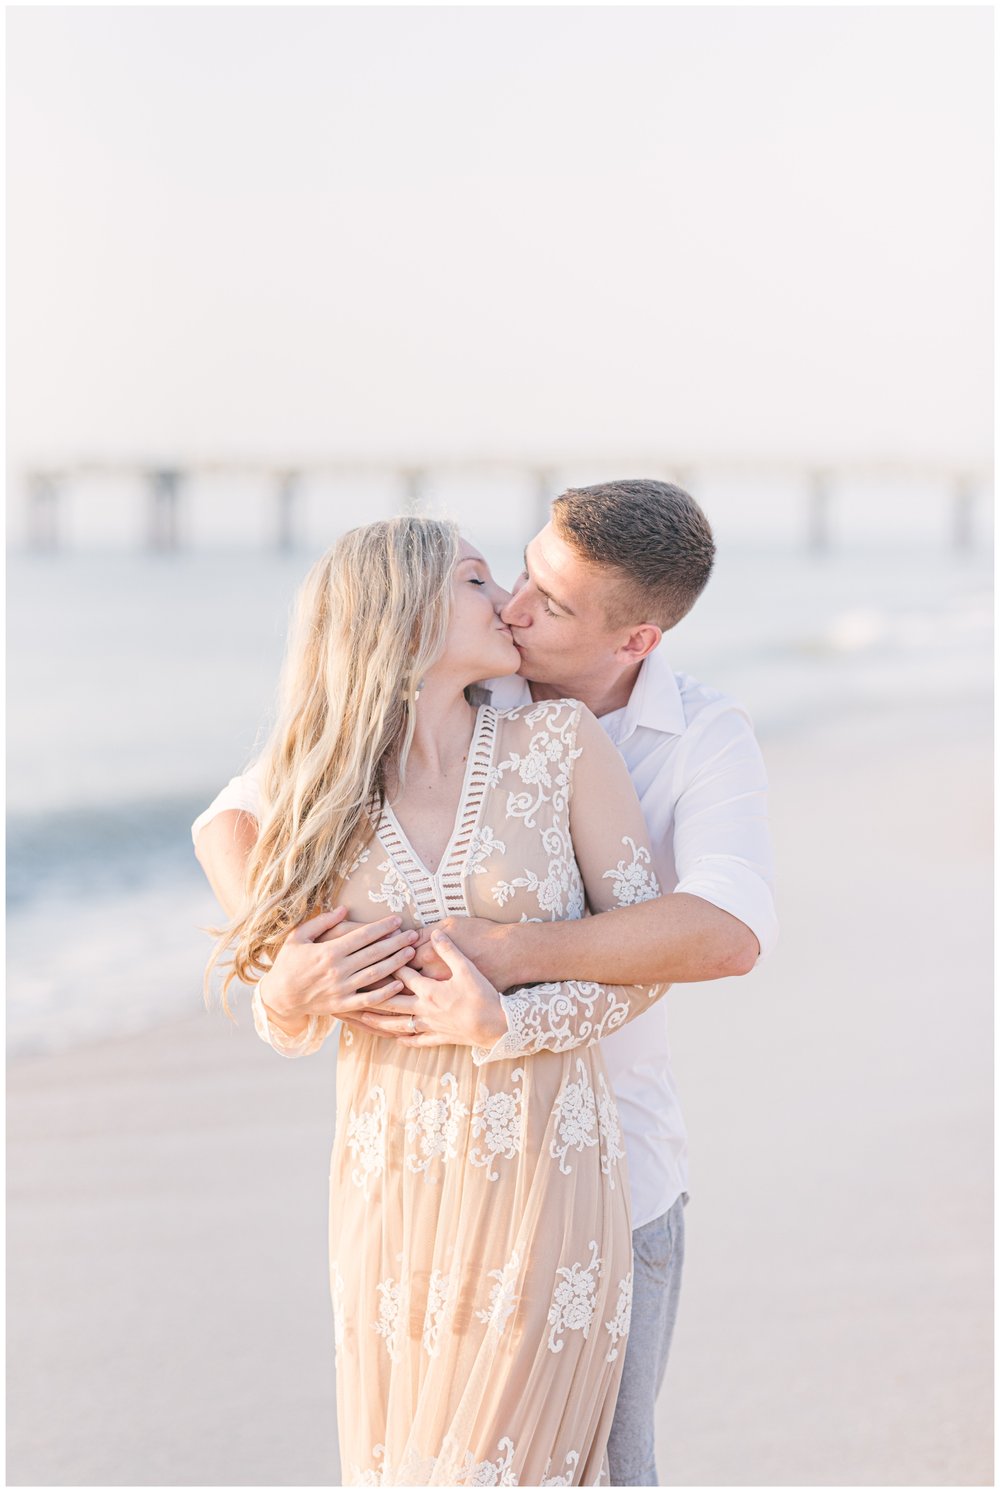 Couple kissing on beach during engagement session with family beach photographer | NKB Photo